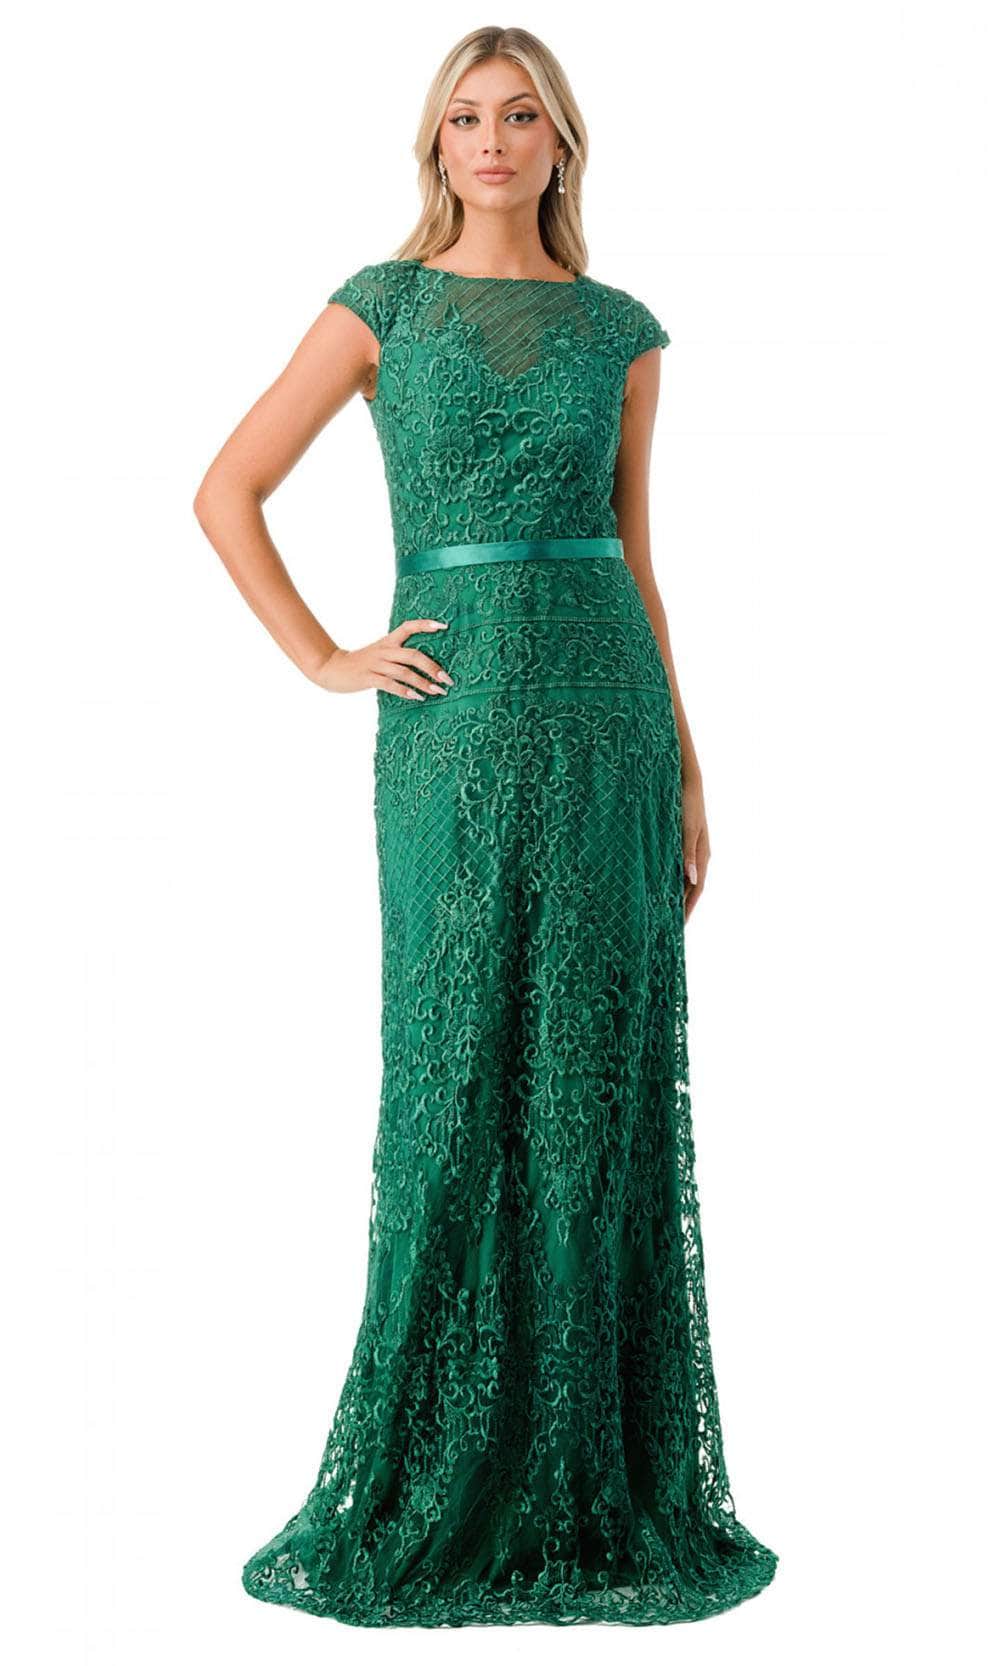 Aspeed Design M2732 - Embroidered Formal Dress XS / Emerald